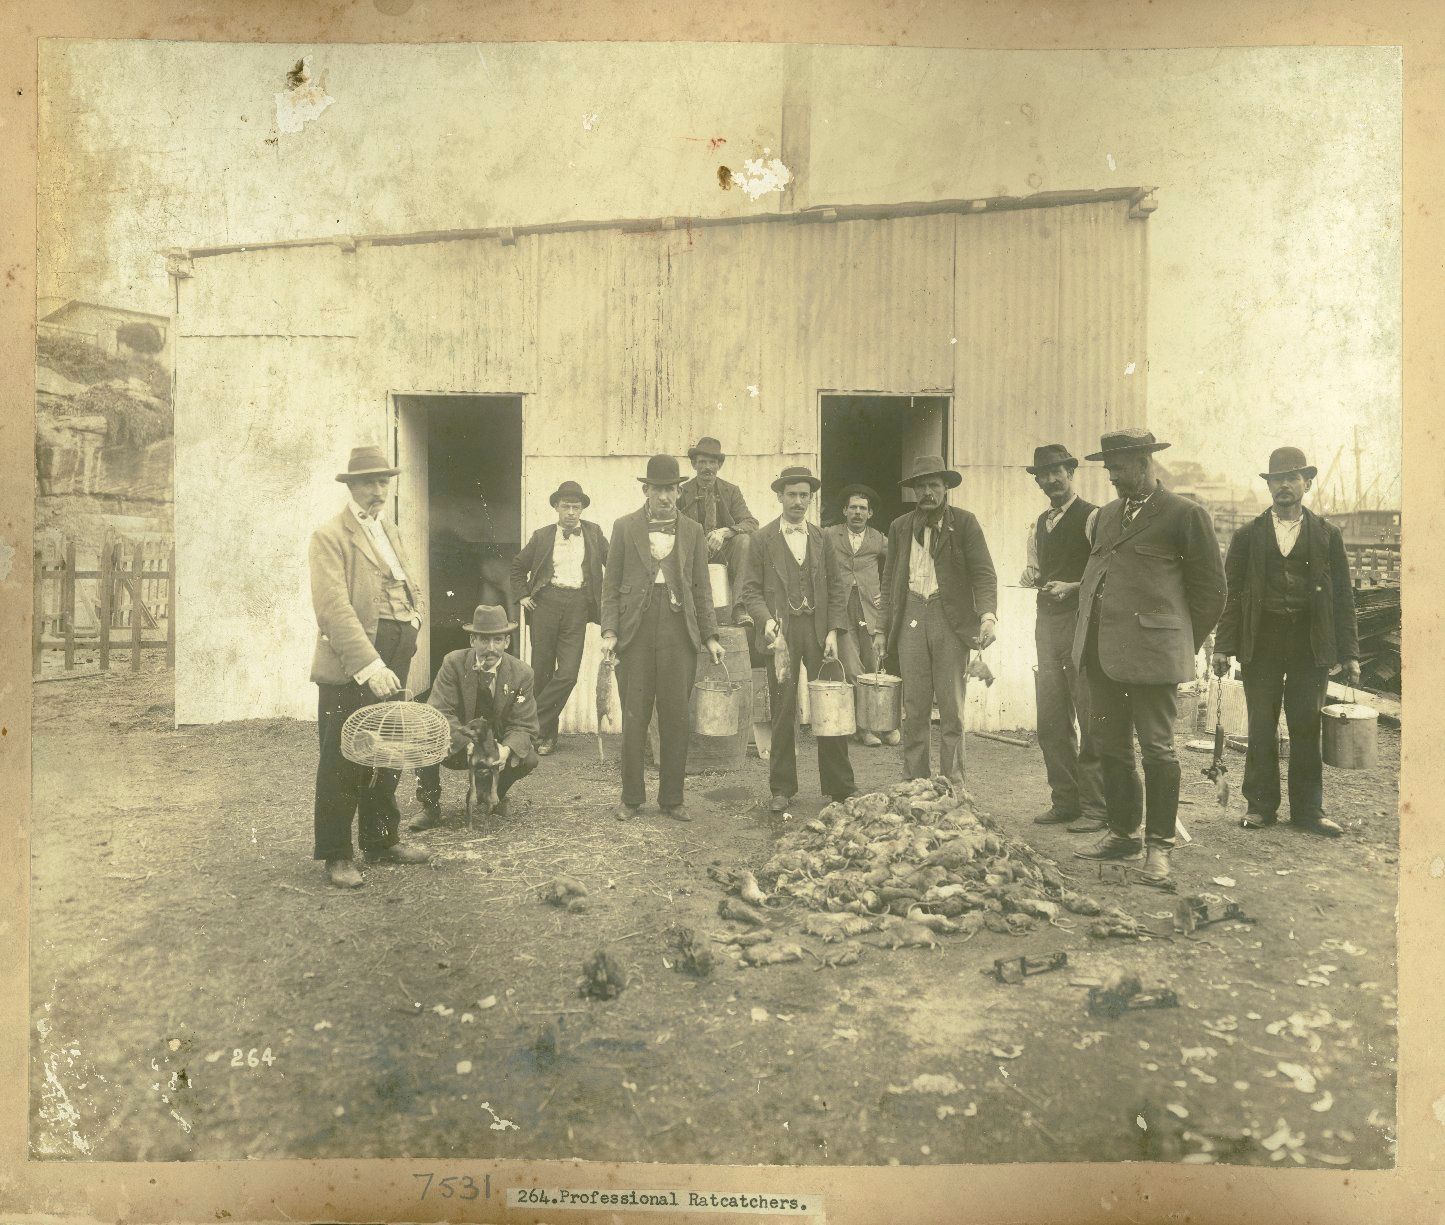 A group of men stand behind a pile of dead rats